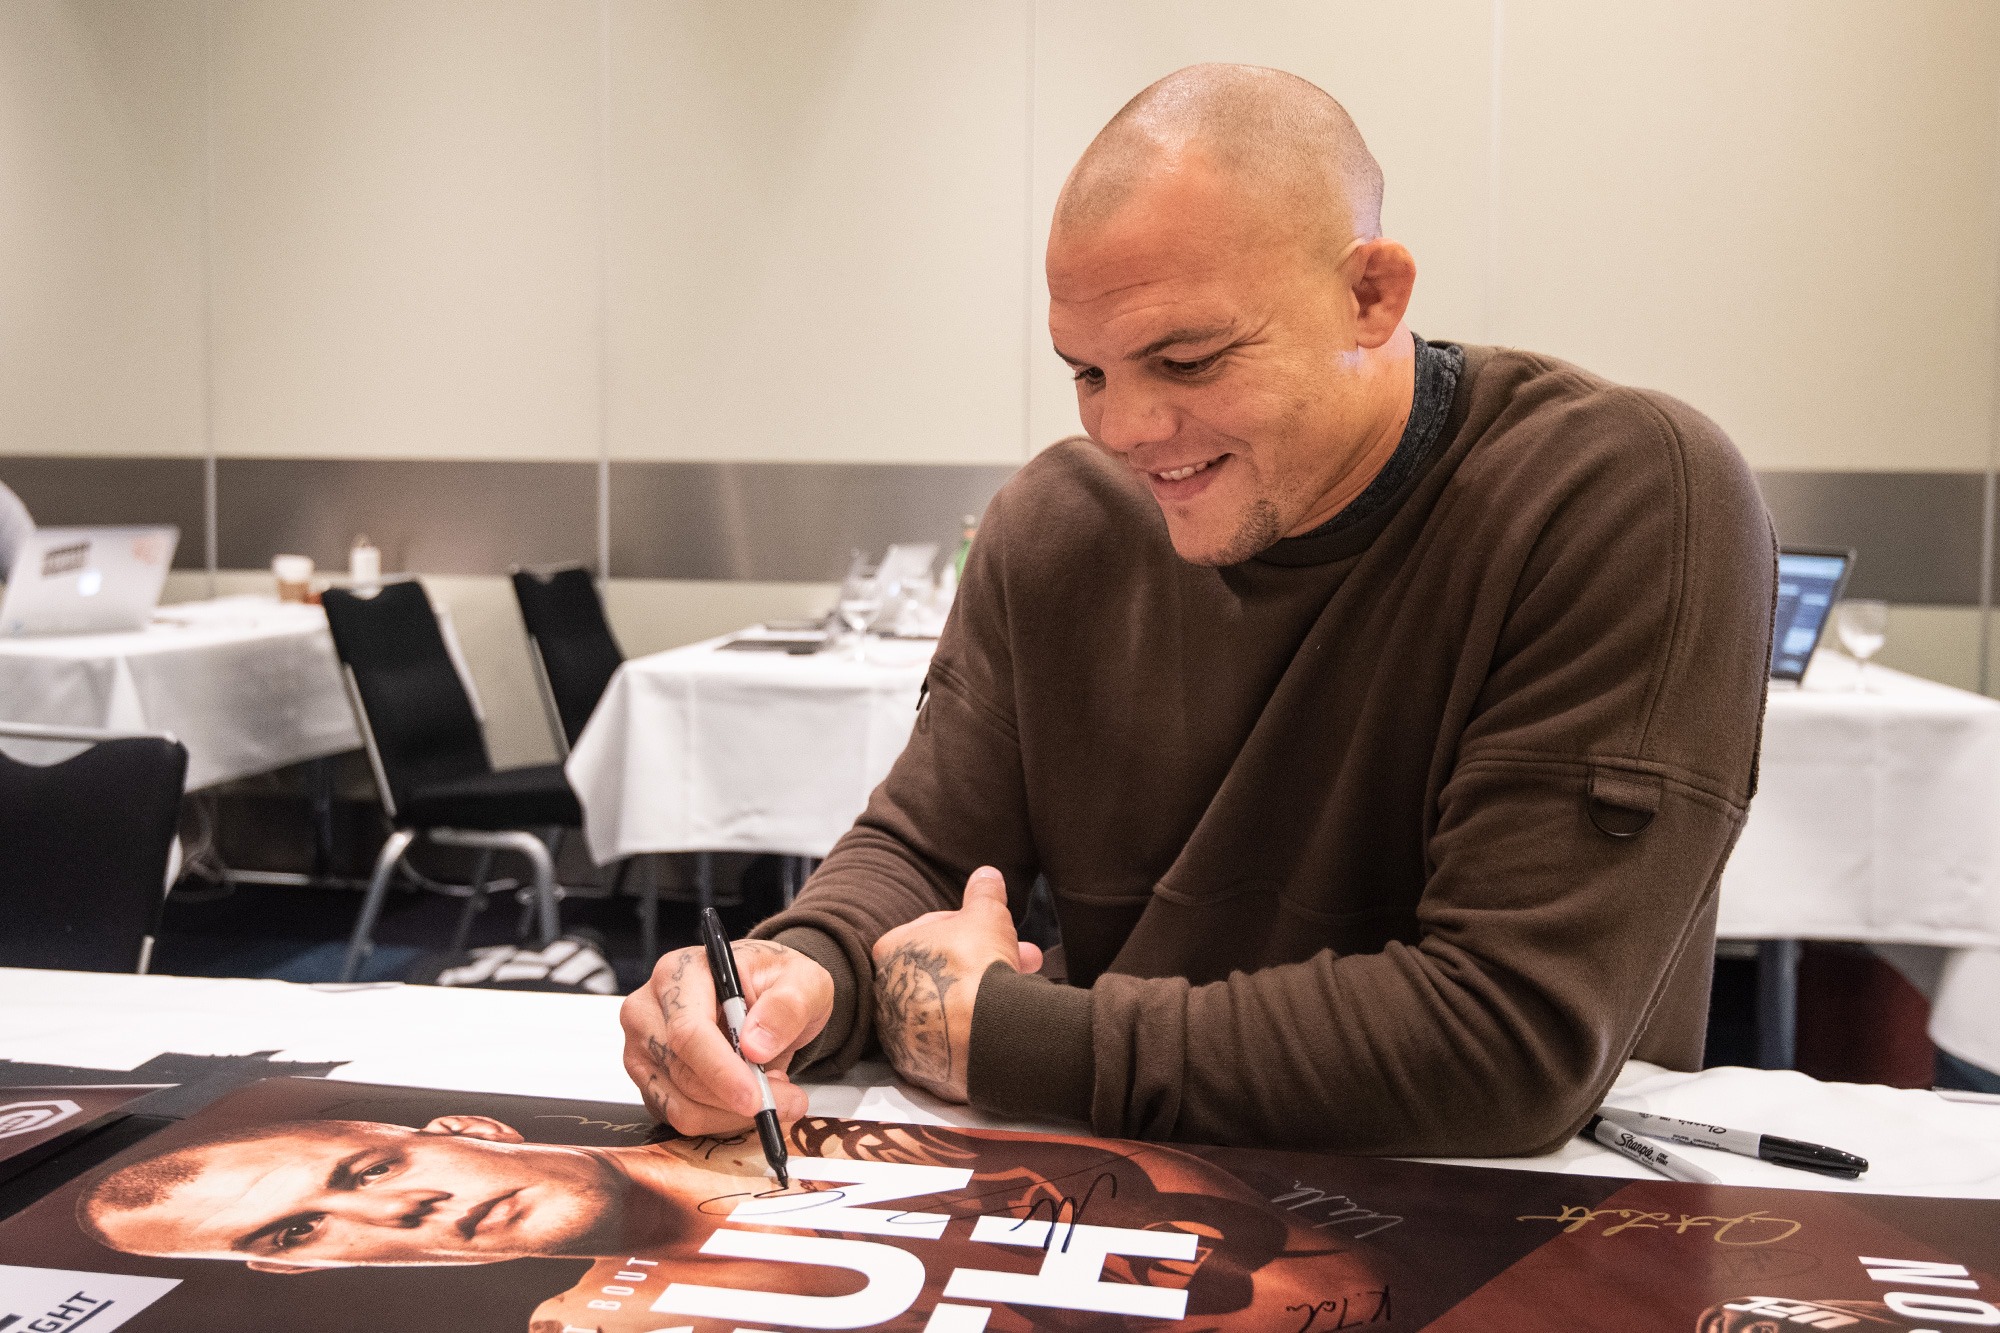 Smith signs posters at Fight Night Hamburg check-ins, 2018.